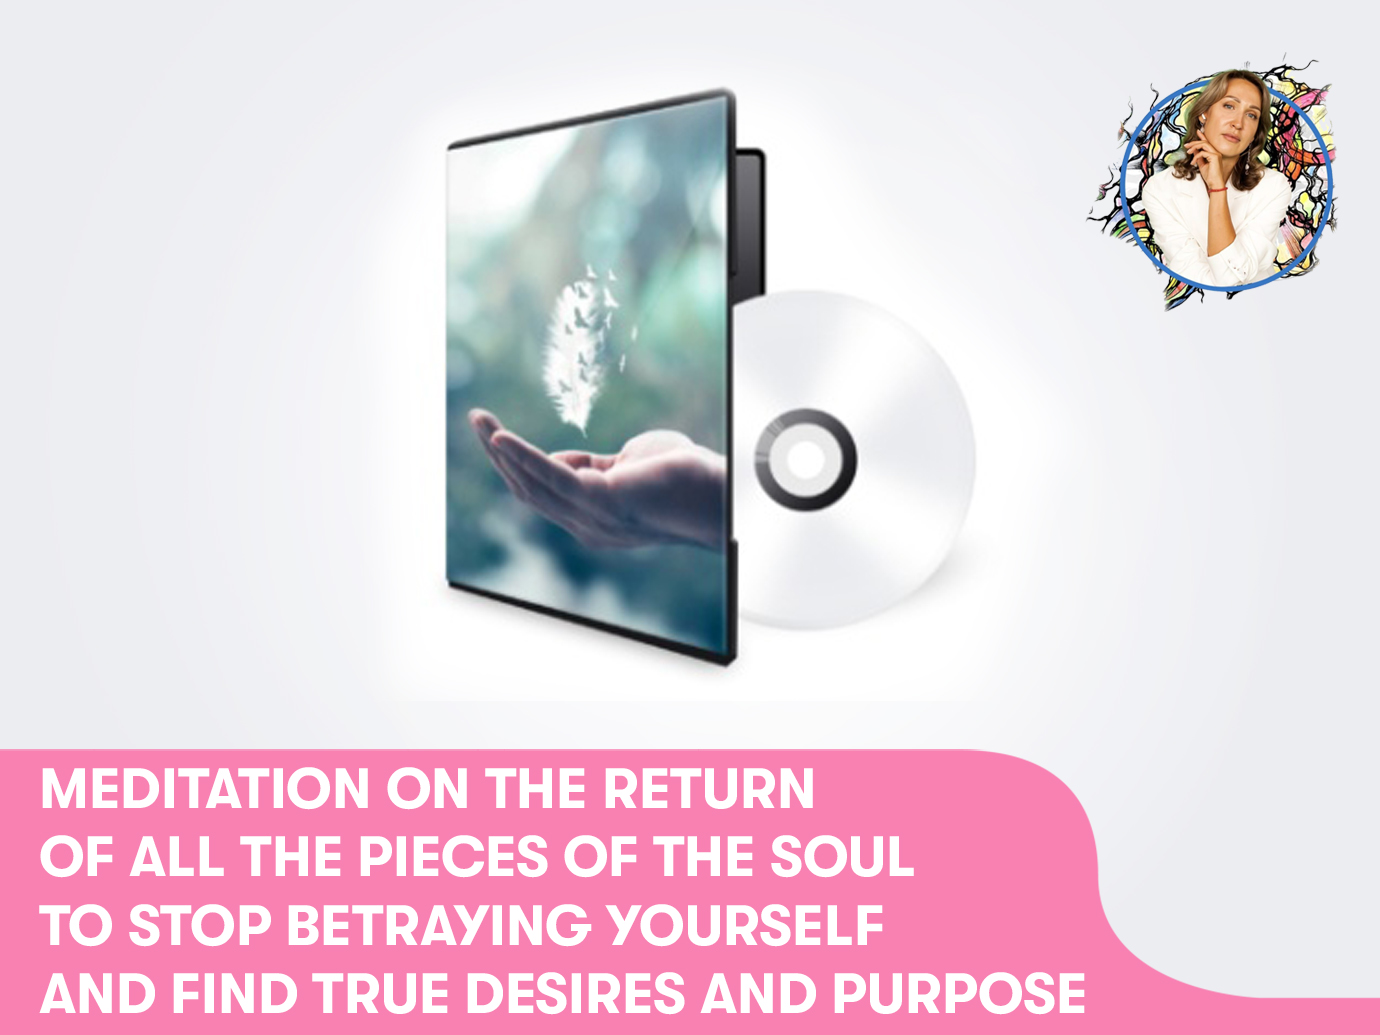 Meditation on the return of all the pieces of the soul to stop betraying yourself and find true desires and purpose